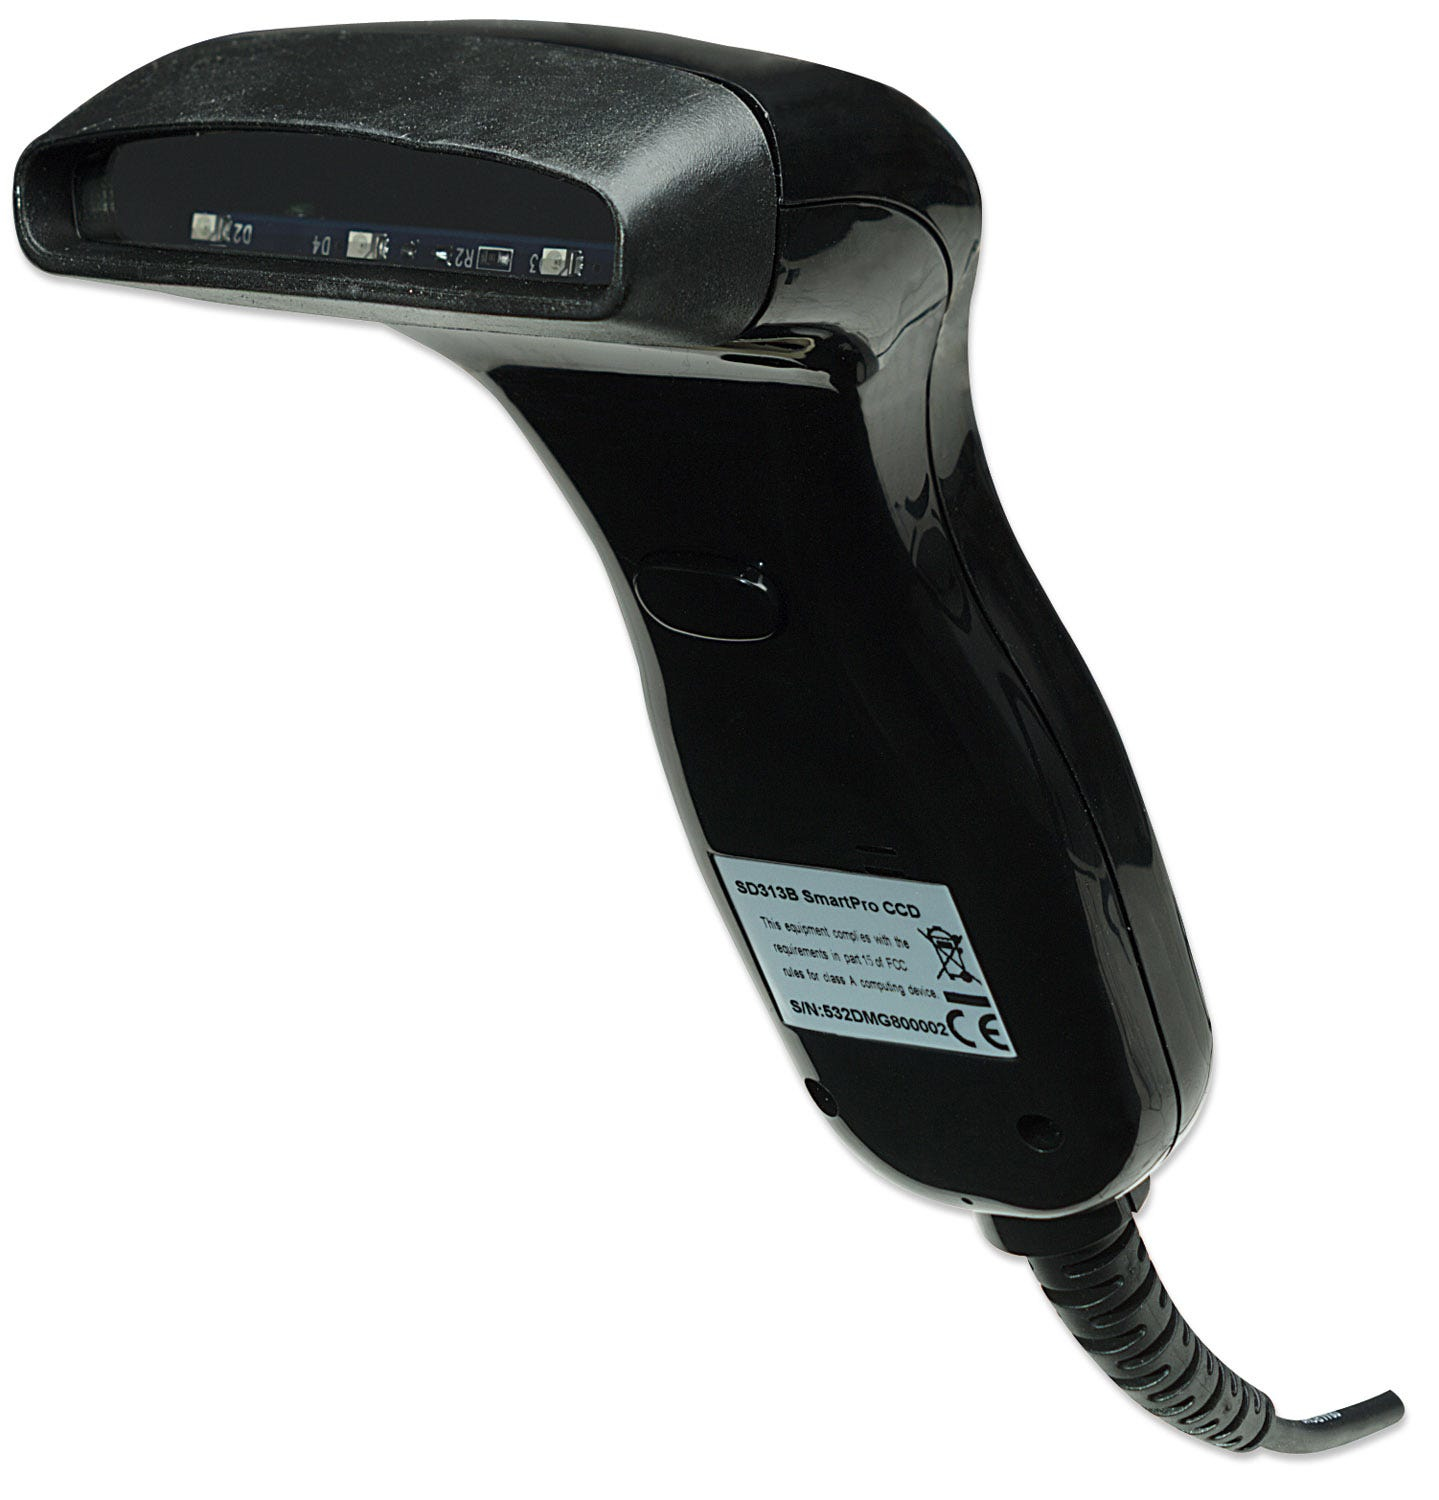 Manhattan Contact CCD Handheld Barcode Scanner, USB, 80mm Scan Width, Cable 152cm, Max Ambient Light: 3,000 lux (sunlight)